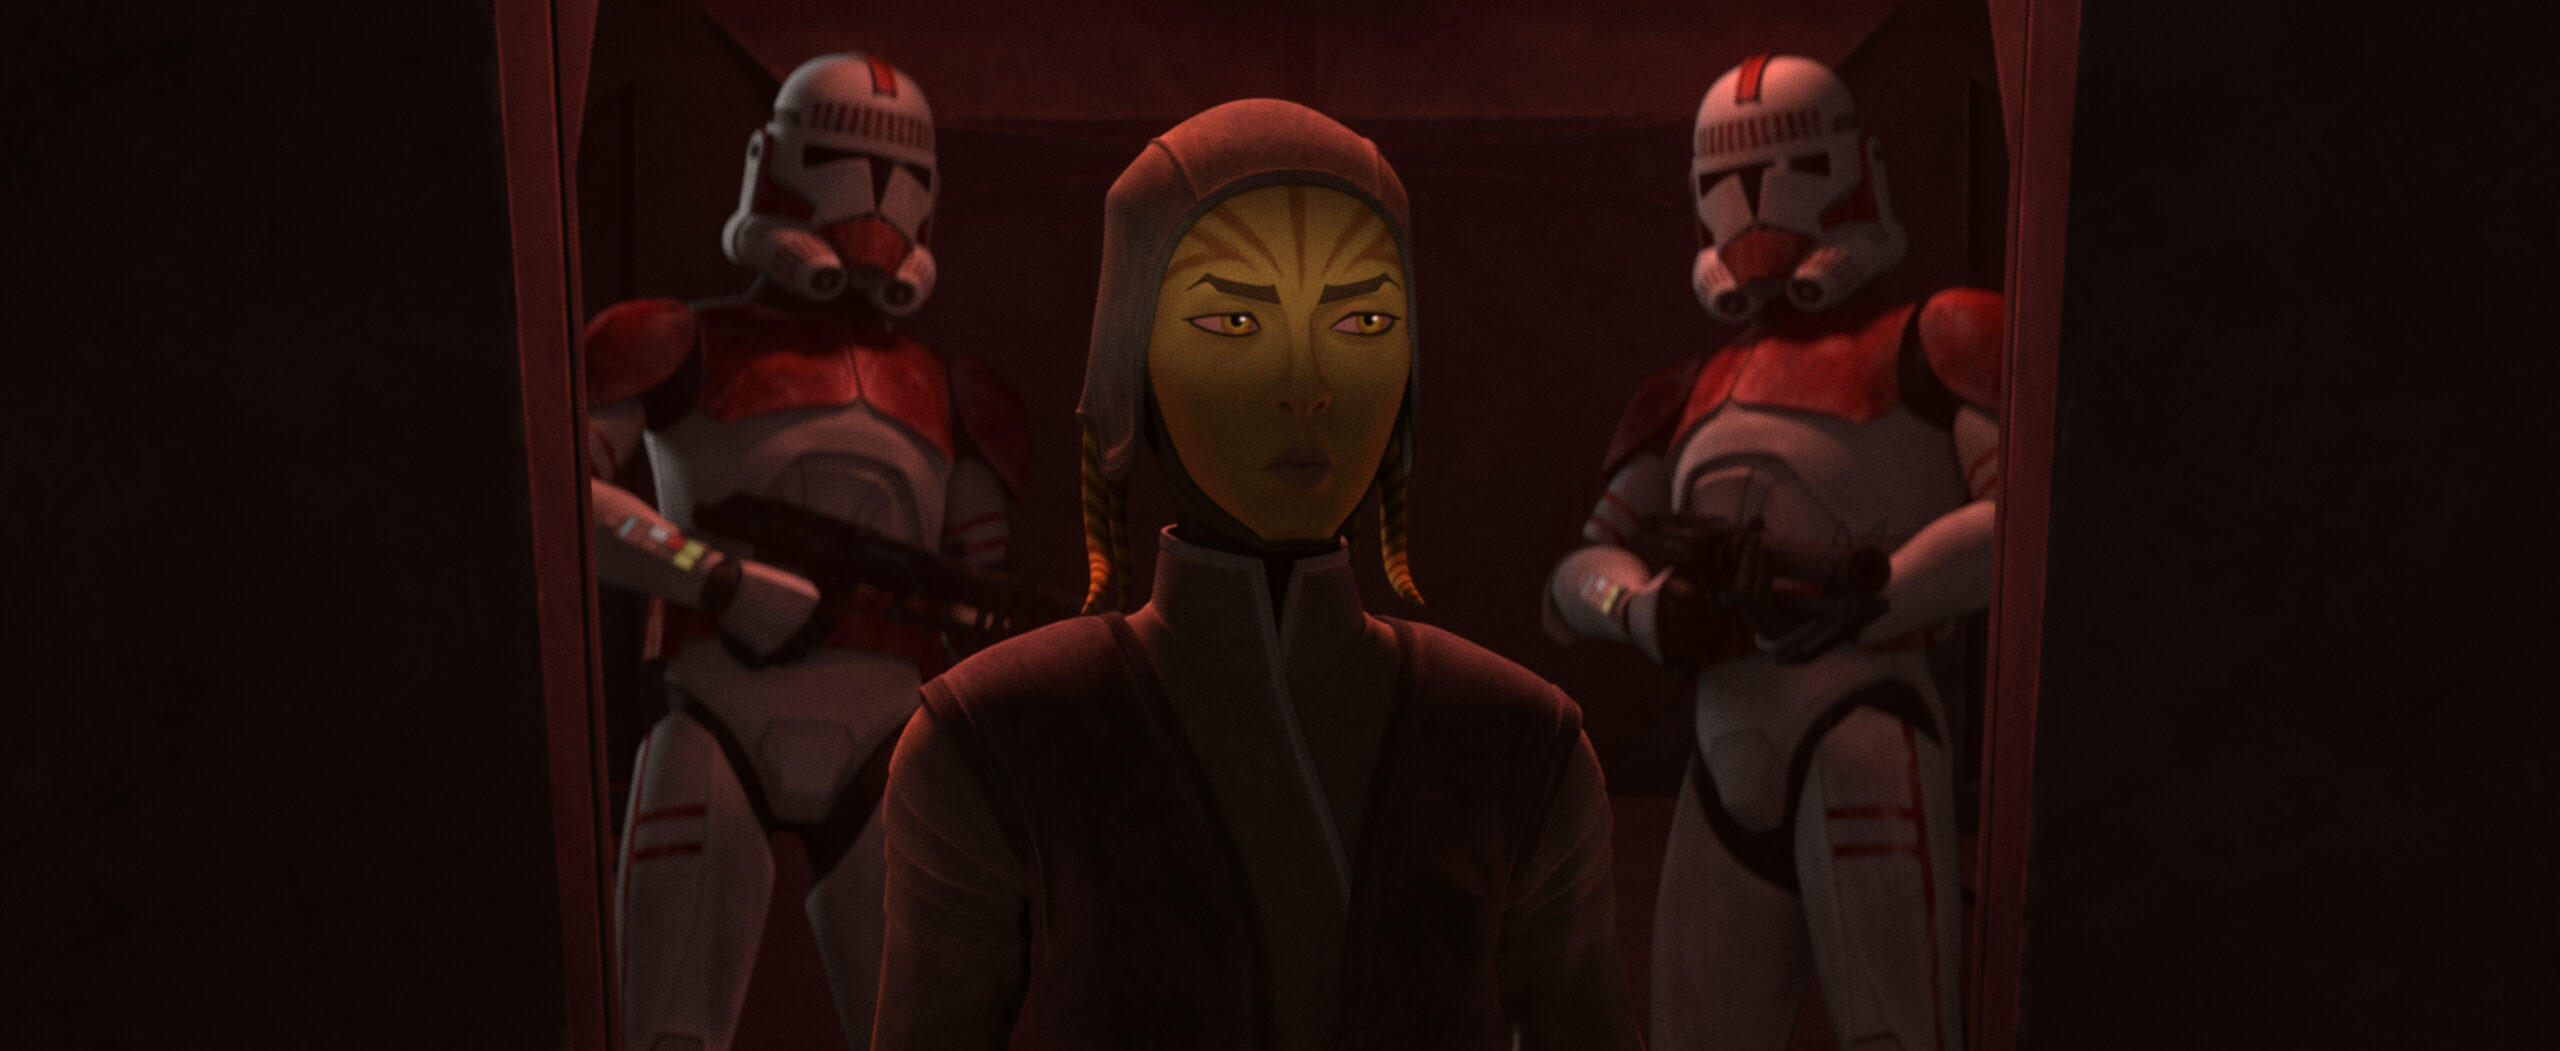 Fourth Sister (center) and clone troopers in a scene from "STAR WARS: TALES OF THE EMPIRE", exclusively on Disney+. © 2024 Lucasfilm Ltd. & ™. All Rights Reserved.